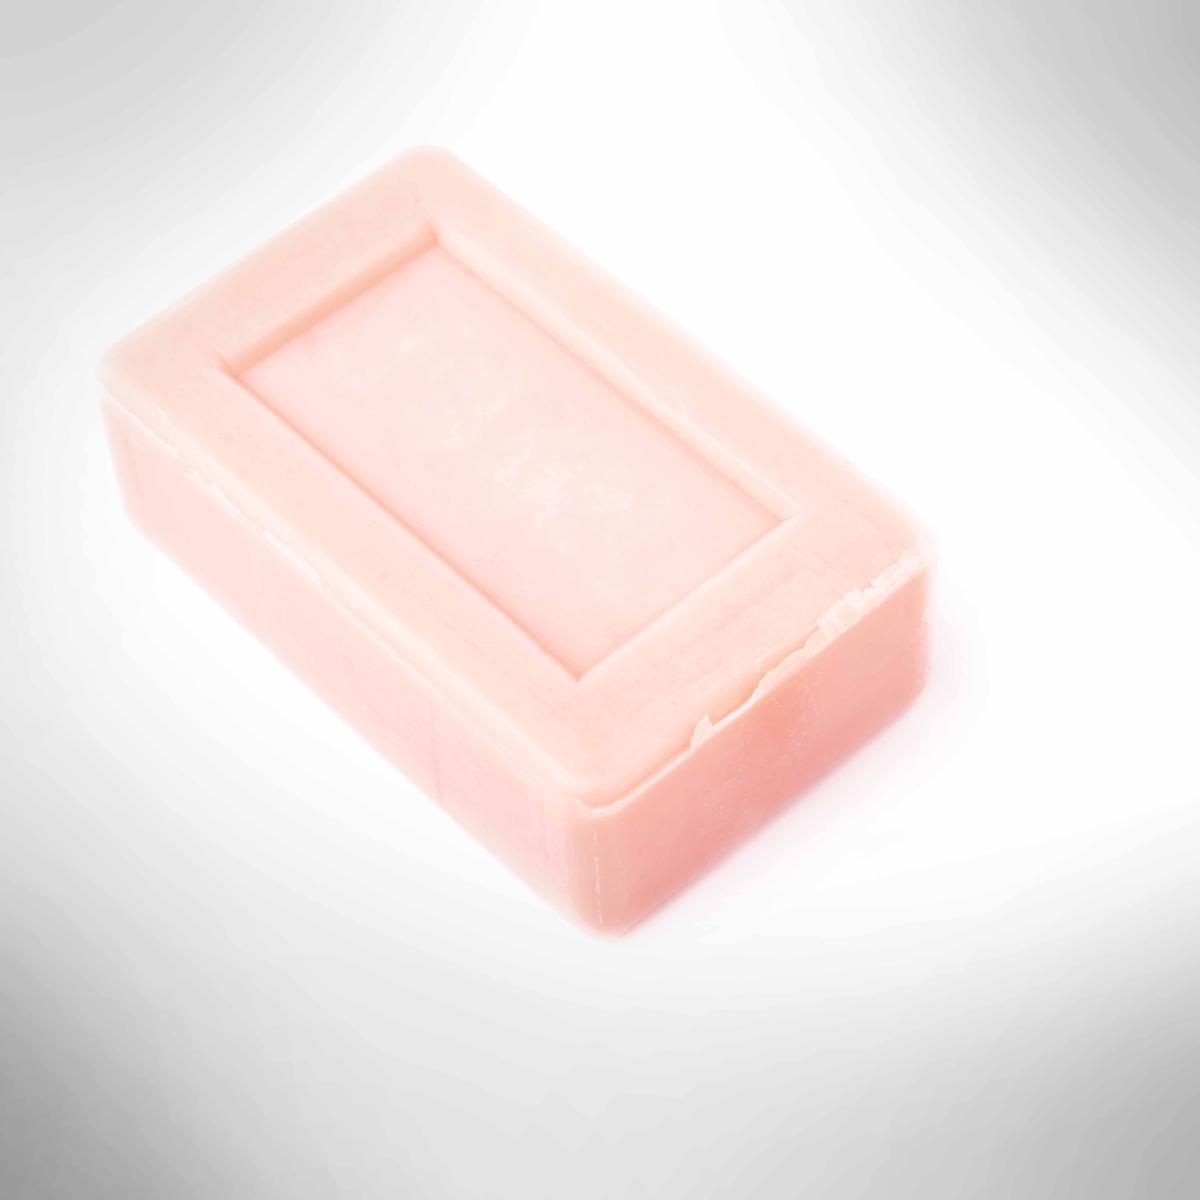 Illustration - Shutterstock | <a href="https://www.shutterstock.com/image-photo/pink-dry-soap-bar-isolated-over-514997395">exopixel</a>